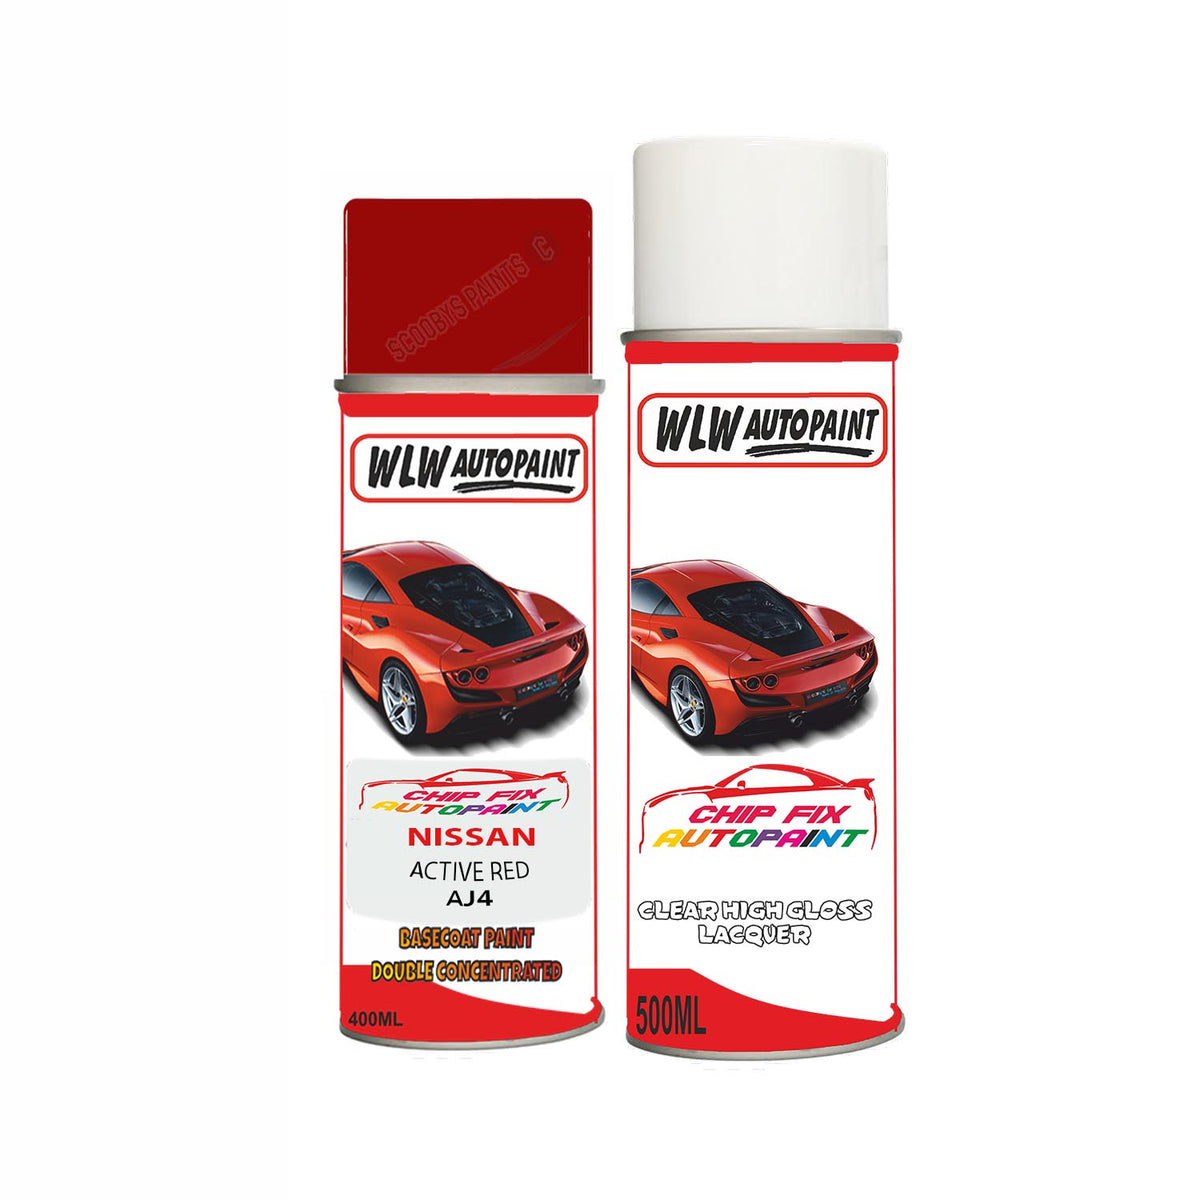 for Nissan (aj4 - Active Red) Exact Match Aerosol Spray Touch Up Paint Clearcoat and Primer - Pick Your Color, Size: Spray - Premium Kit